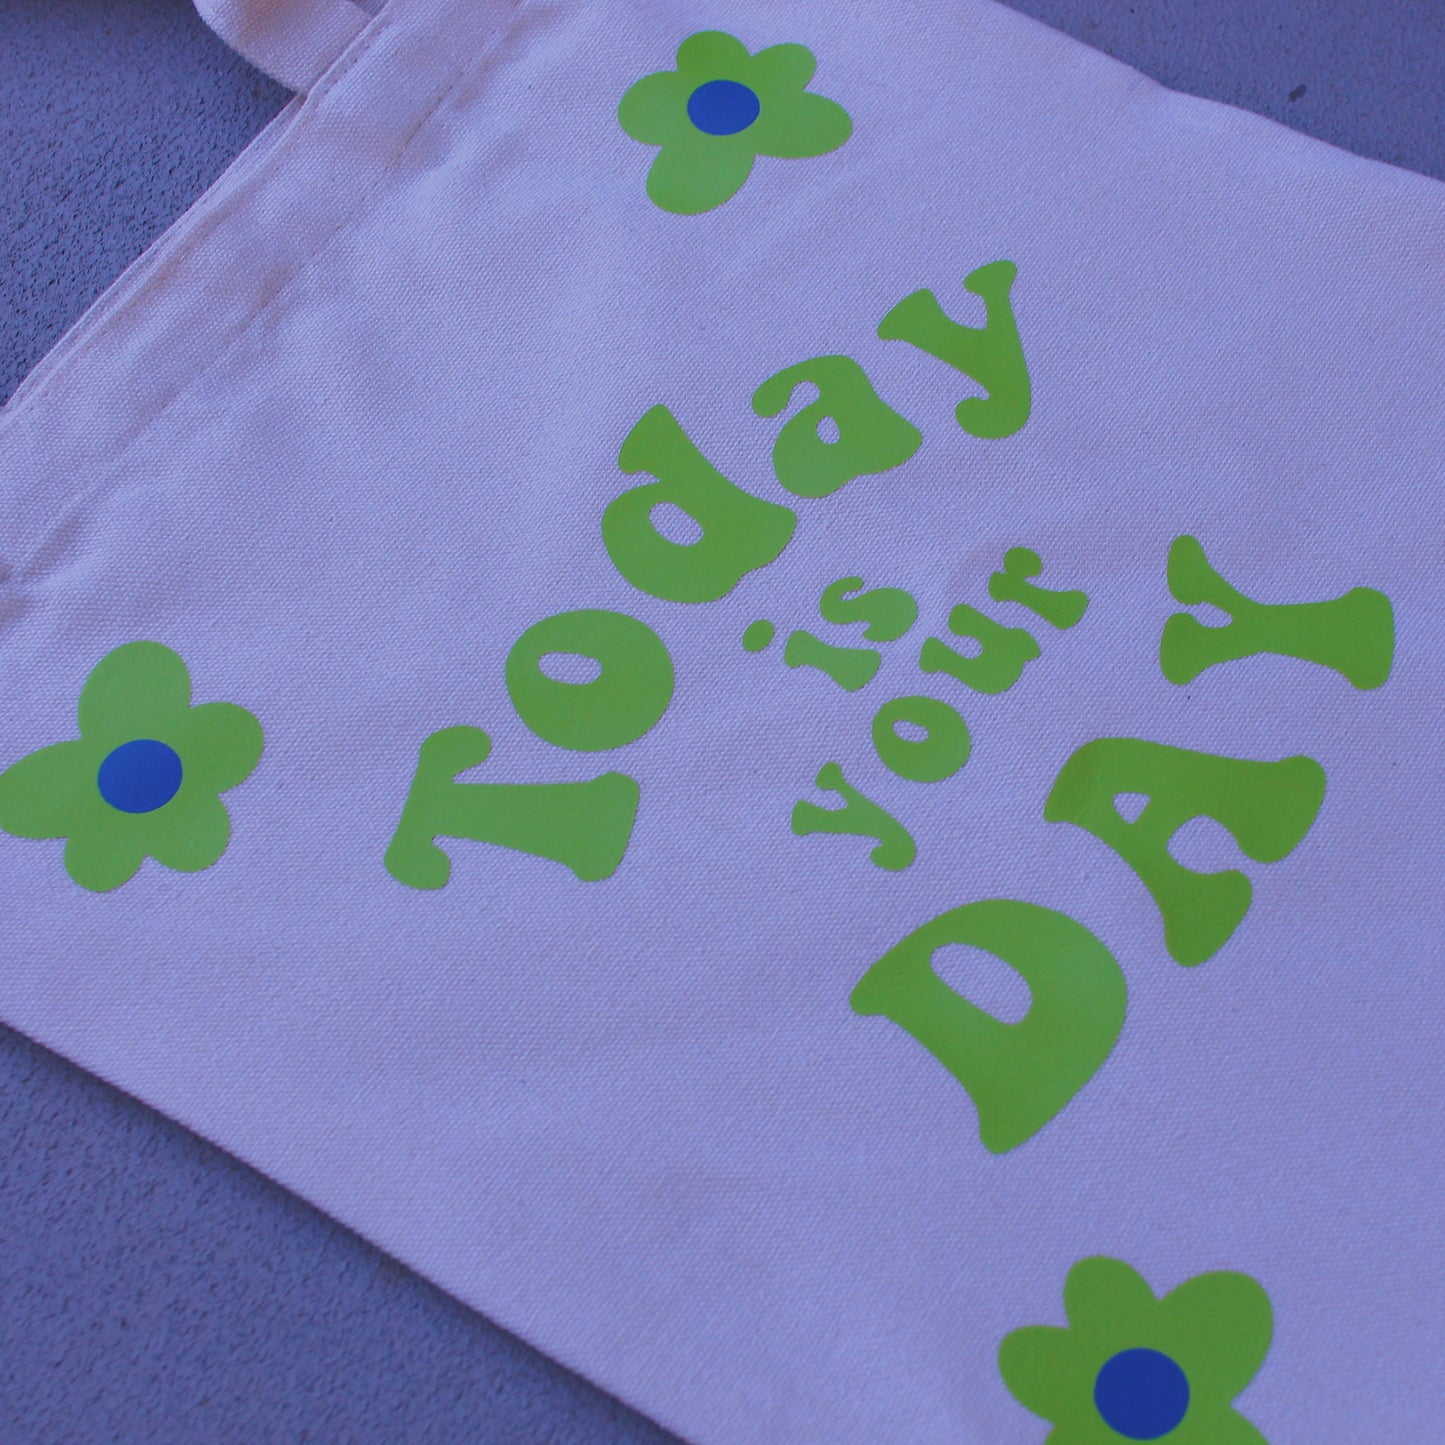 Today is your day Tote- Green